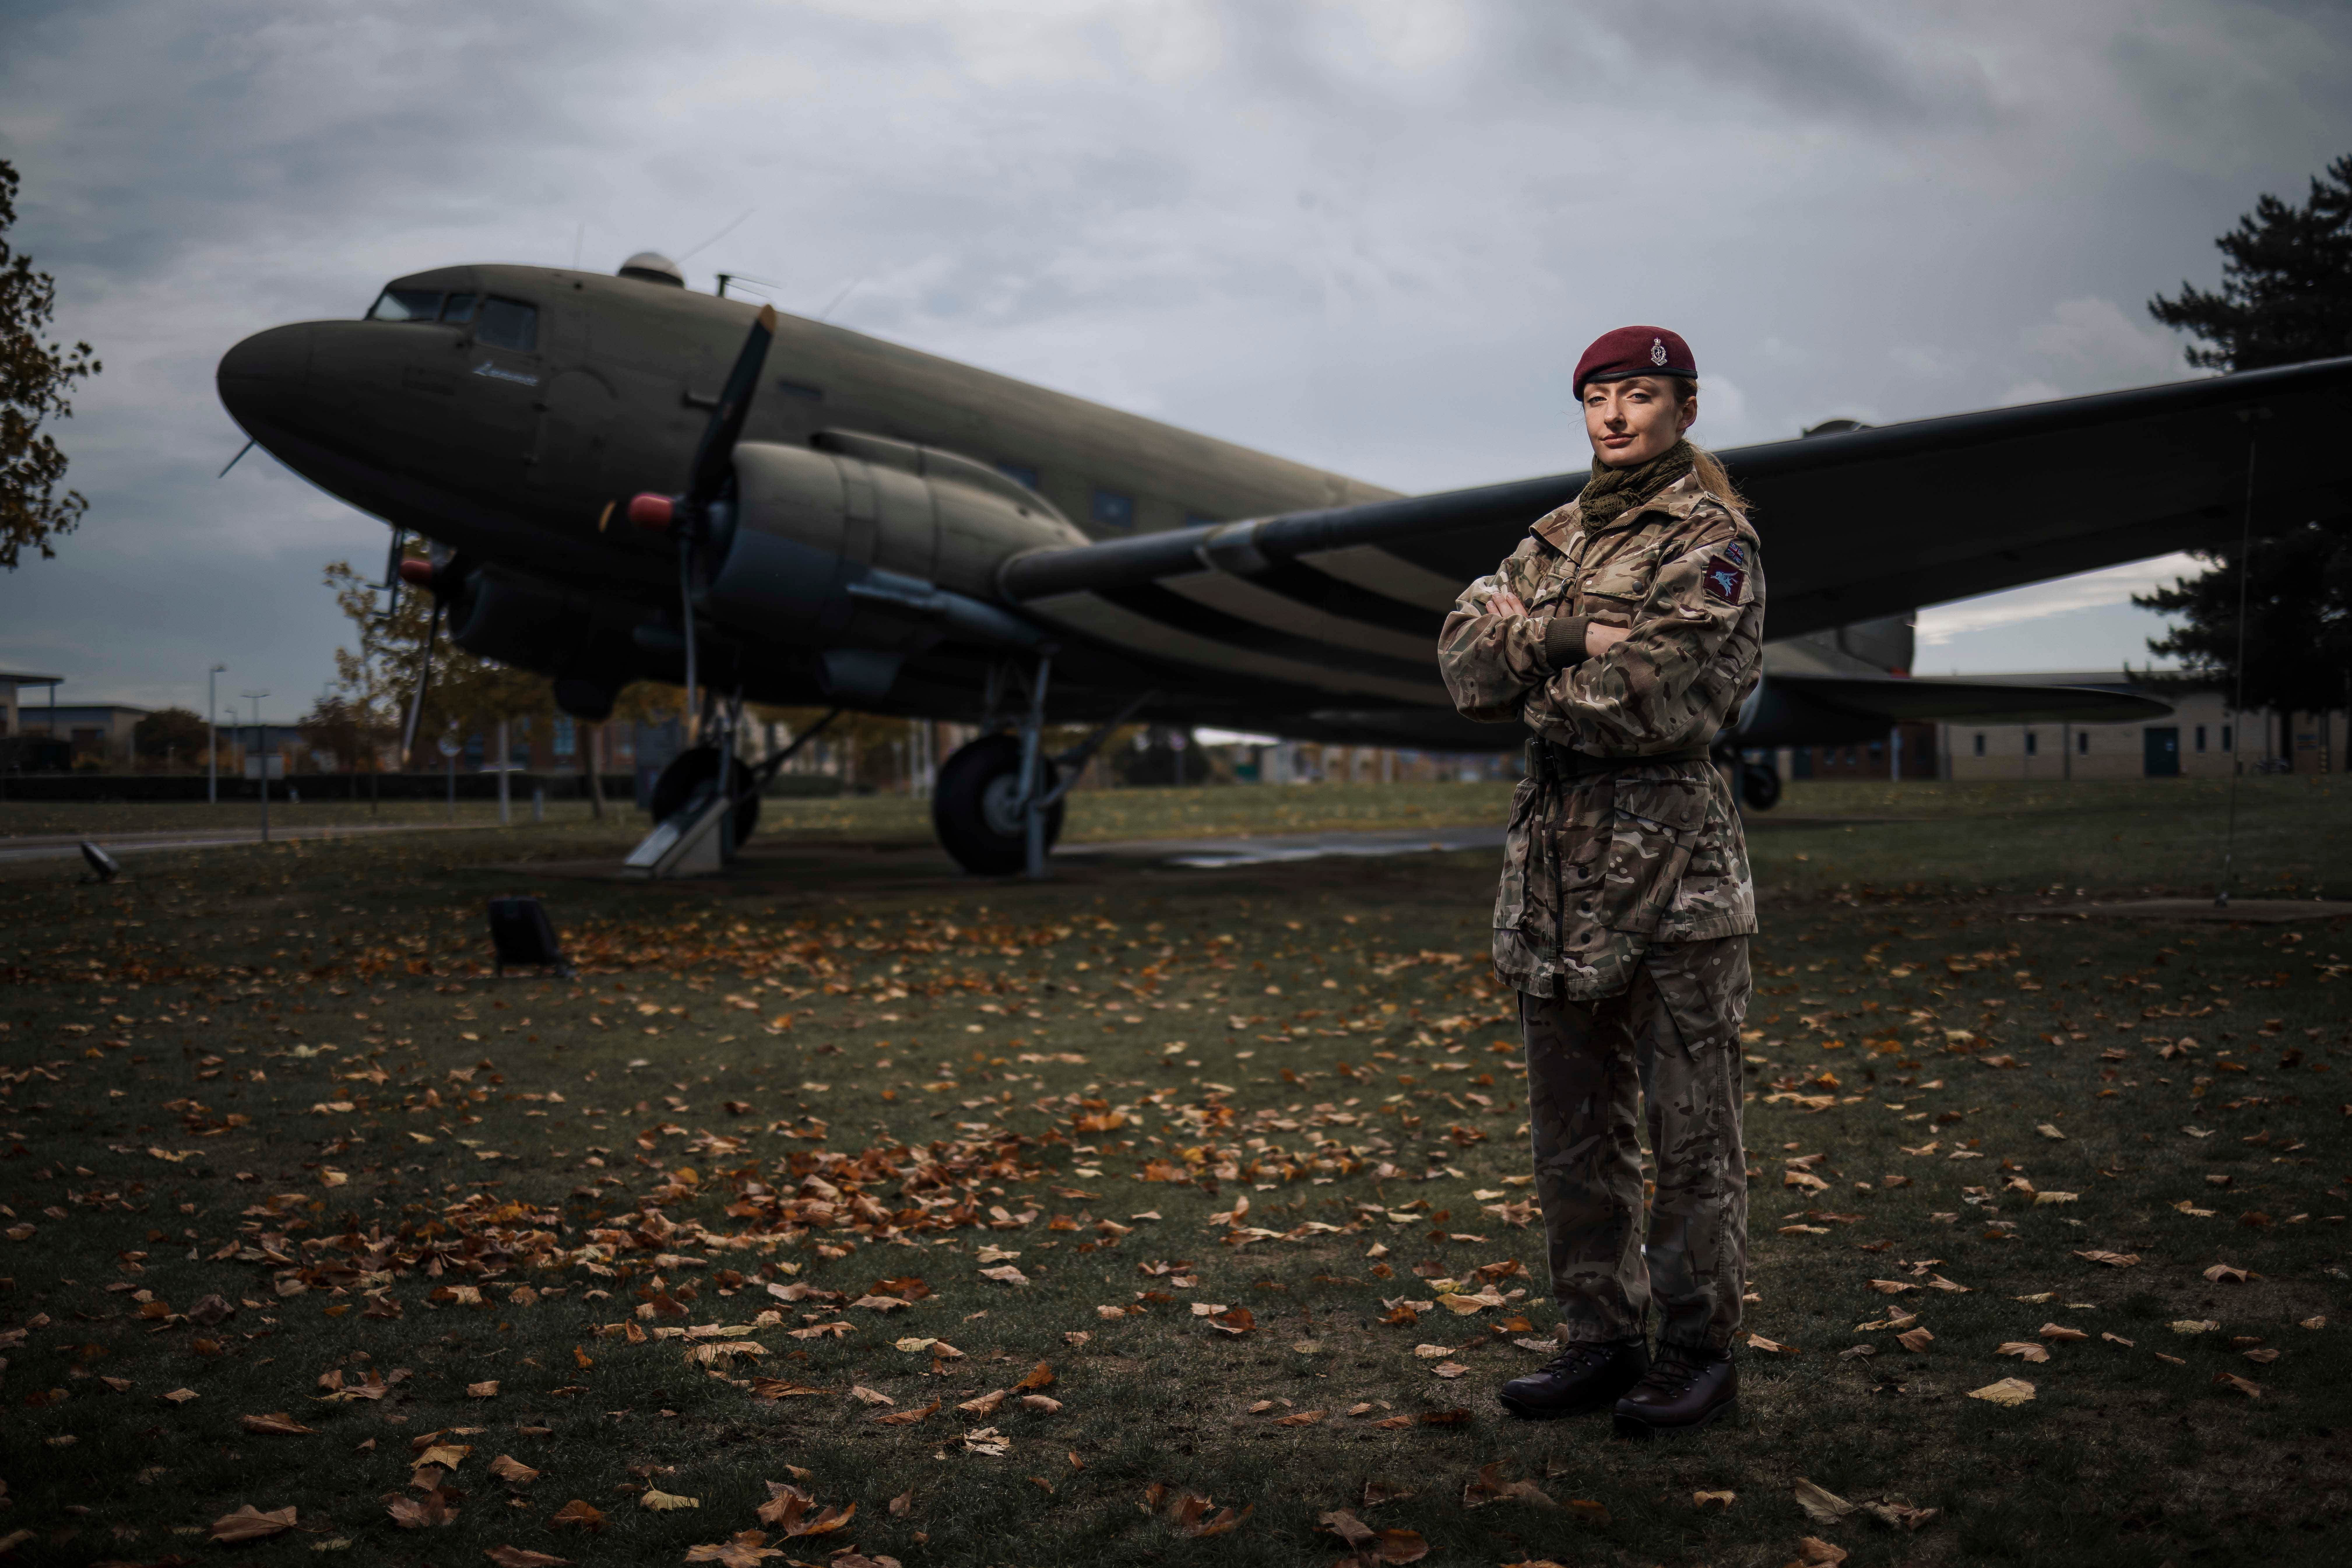 Pte Addy Carter stands in front of the WW2 Dakota aircraft at Merville Barracks, Colchester (PA)Private Addy Carter, of Colchester-based 16 Medical Regiment, is the first female soldier to pass All Arms Pre Parachute Selection.The course Ð known as P Company – is designed to test an individualÕs physical fitness, determination and mental robustness under stress, to ensure they have the self-discipline and motivation for service in Airborne Forces.Pte Carter, 21, follows in the footprints of Captain Rosie Wild, of 7th Parachute Regiment Royal Horse Artillery, who was the first female officer to pass the course in 2020.